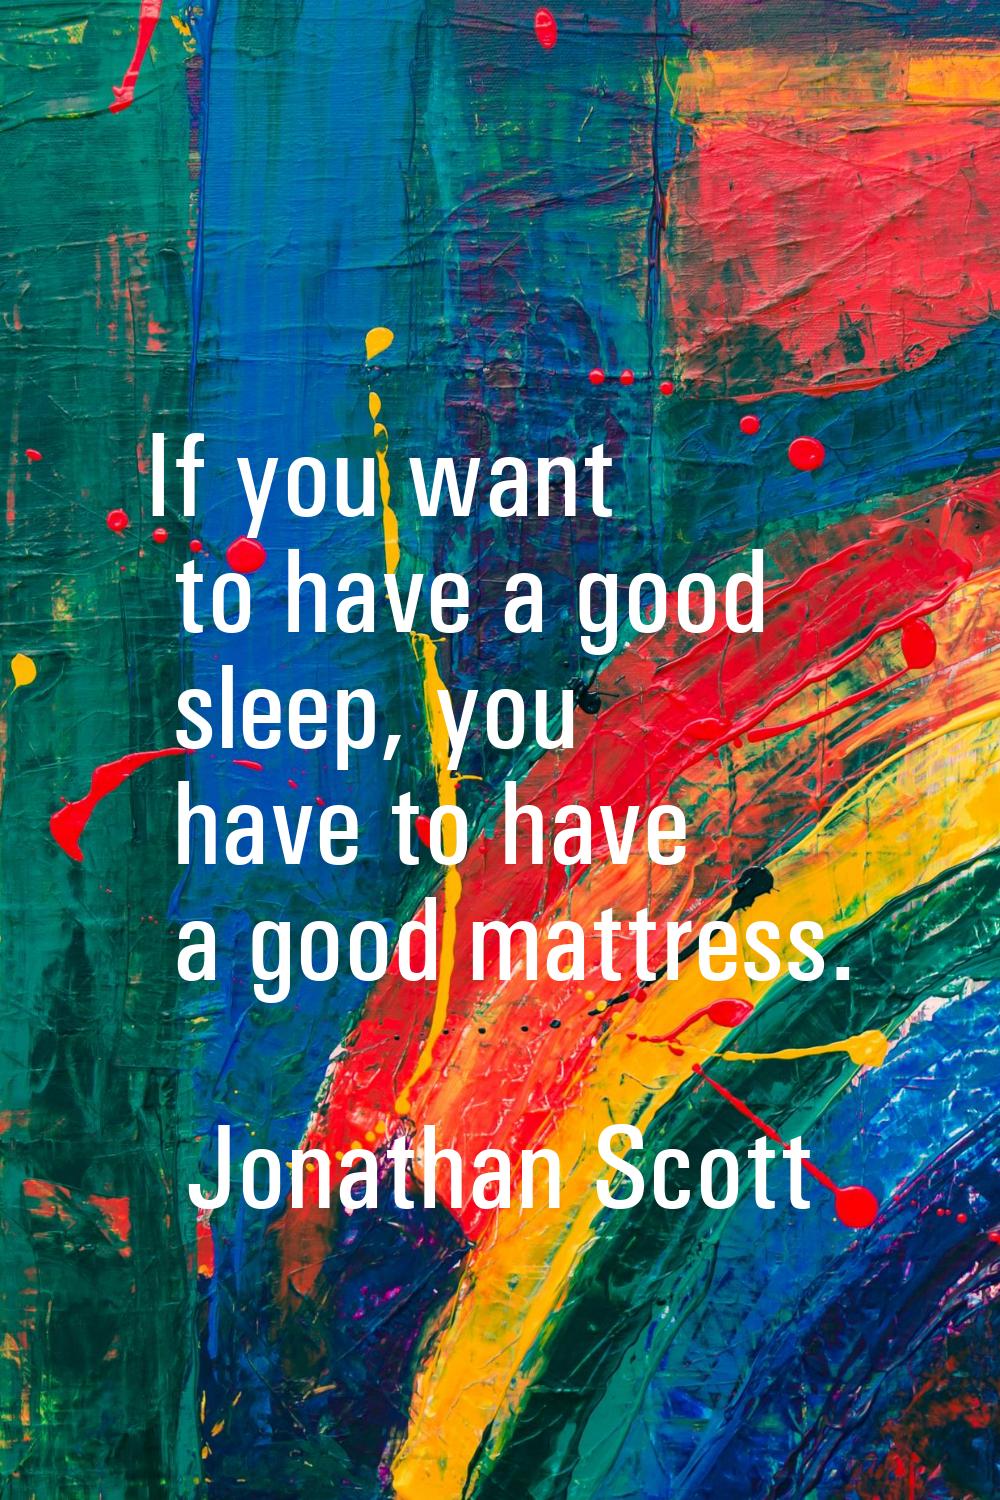 If you want to have a good sleep, you have to have a good mattress.